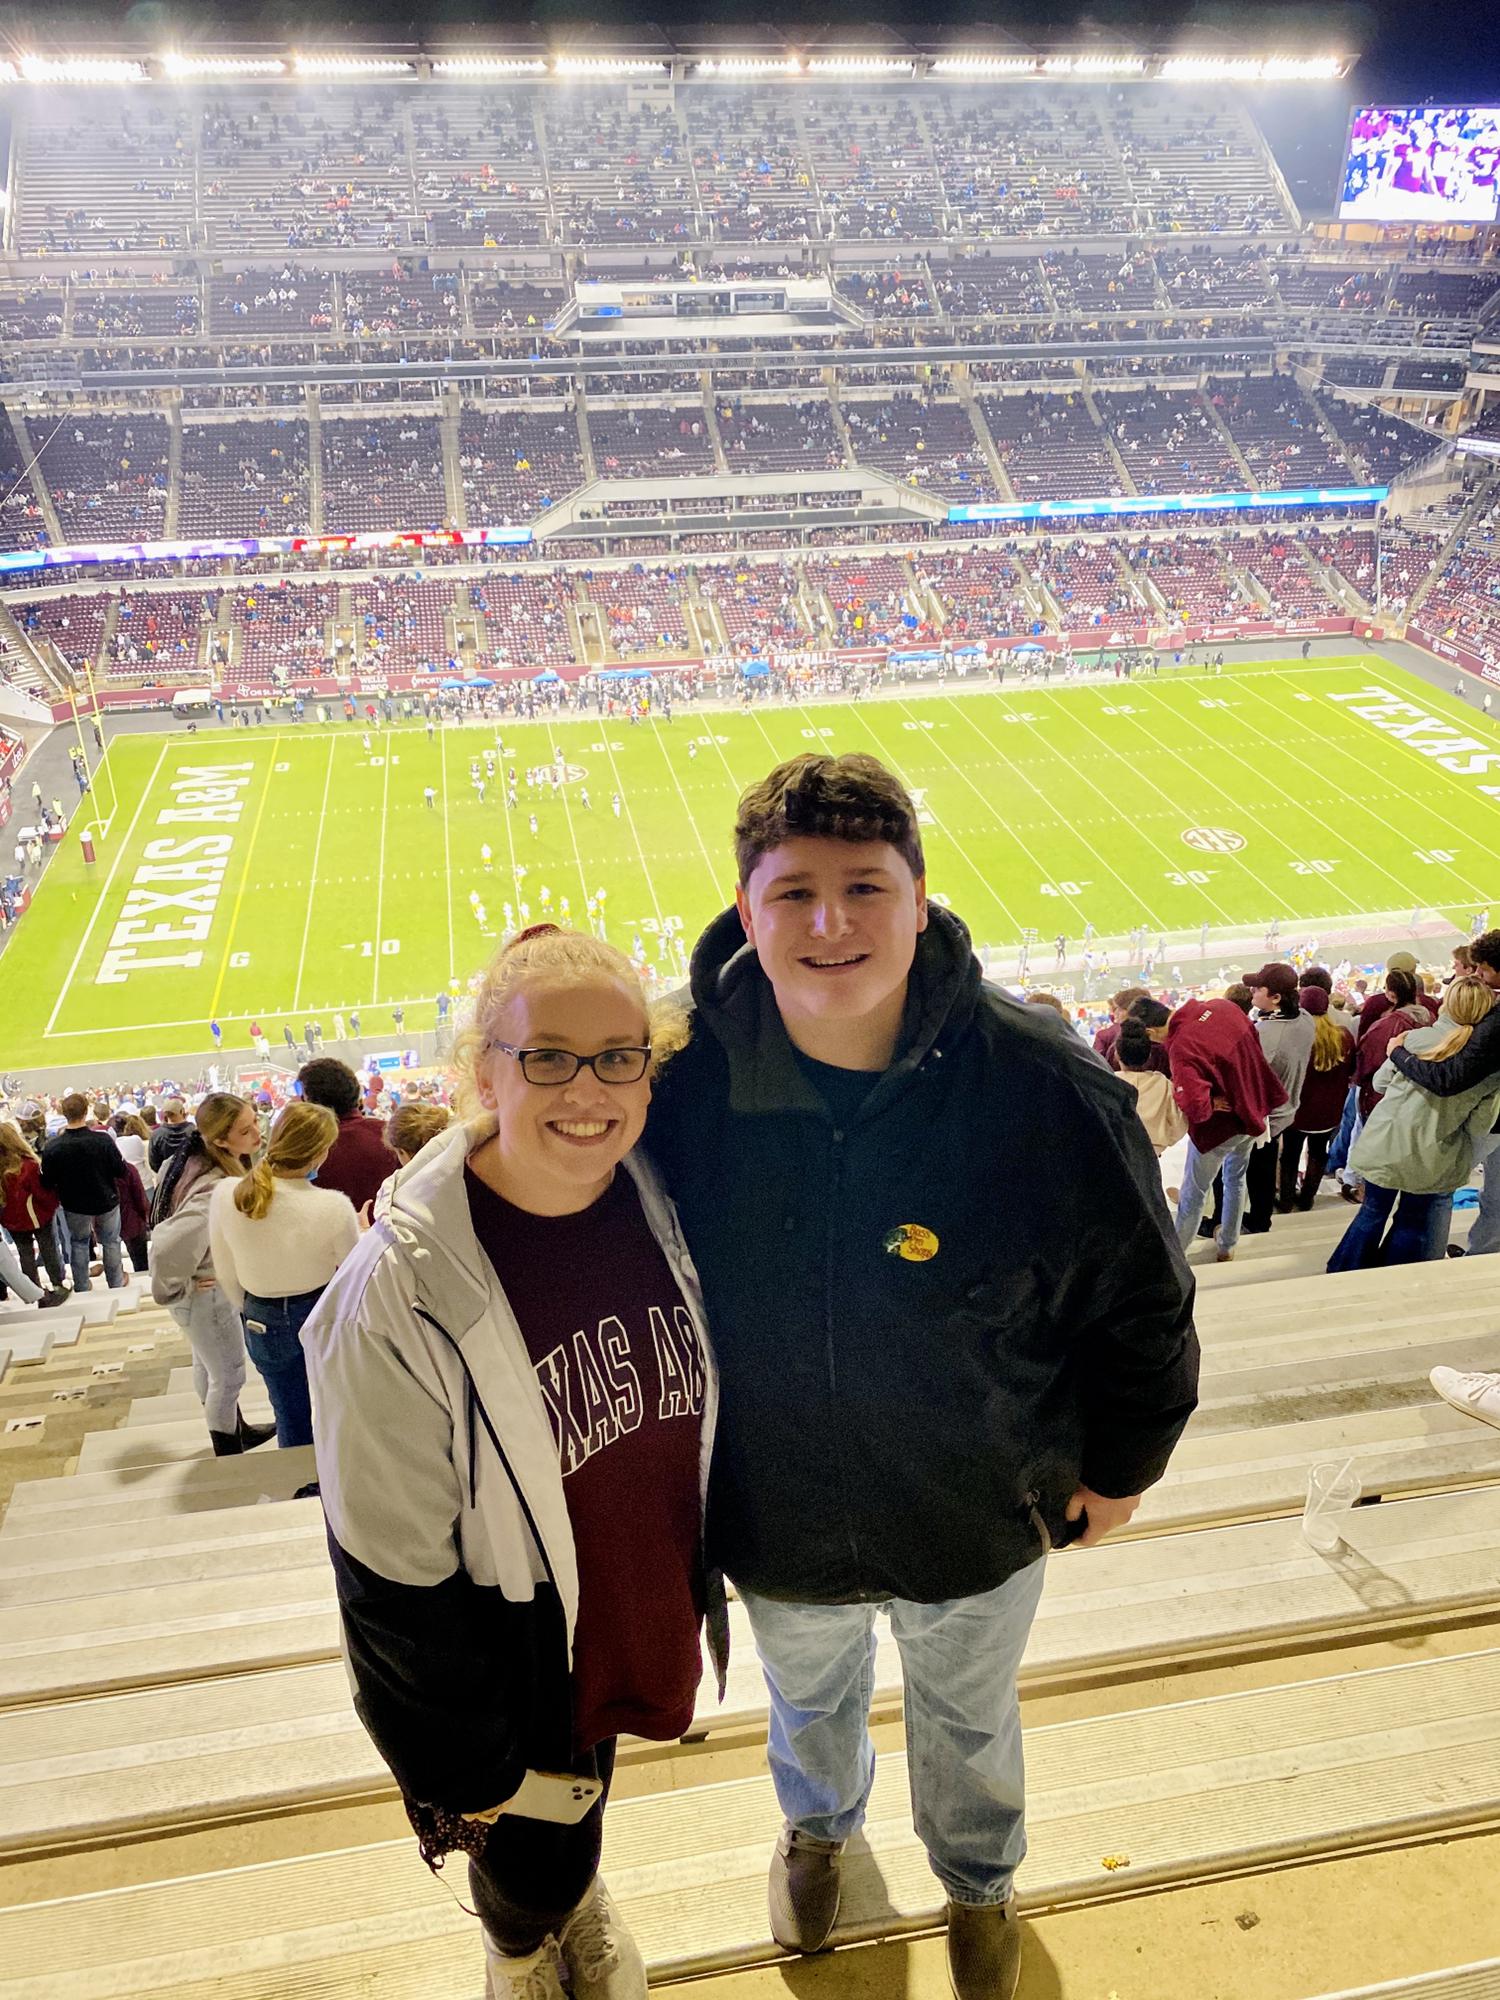 (Finally) Our first and last Aggie football game together.